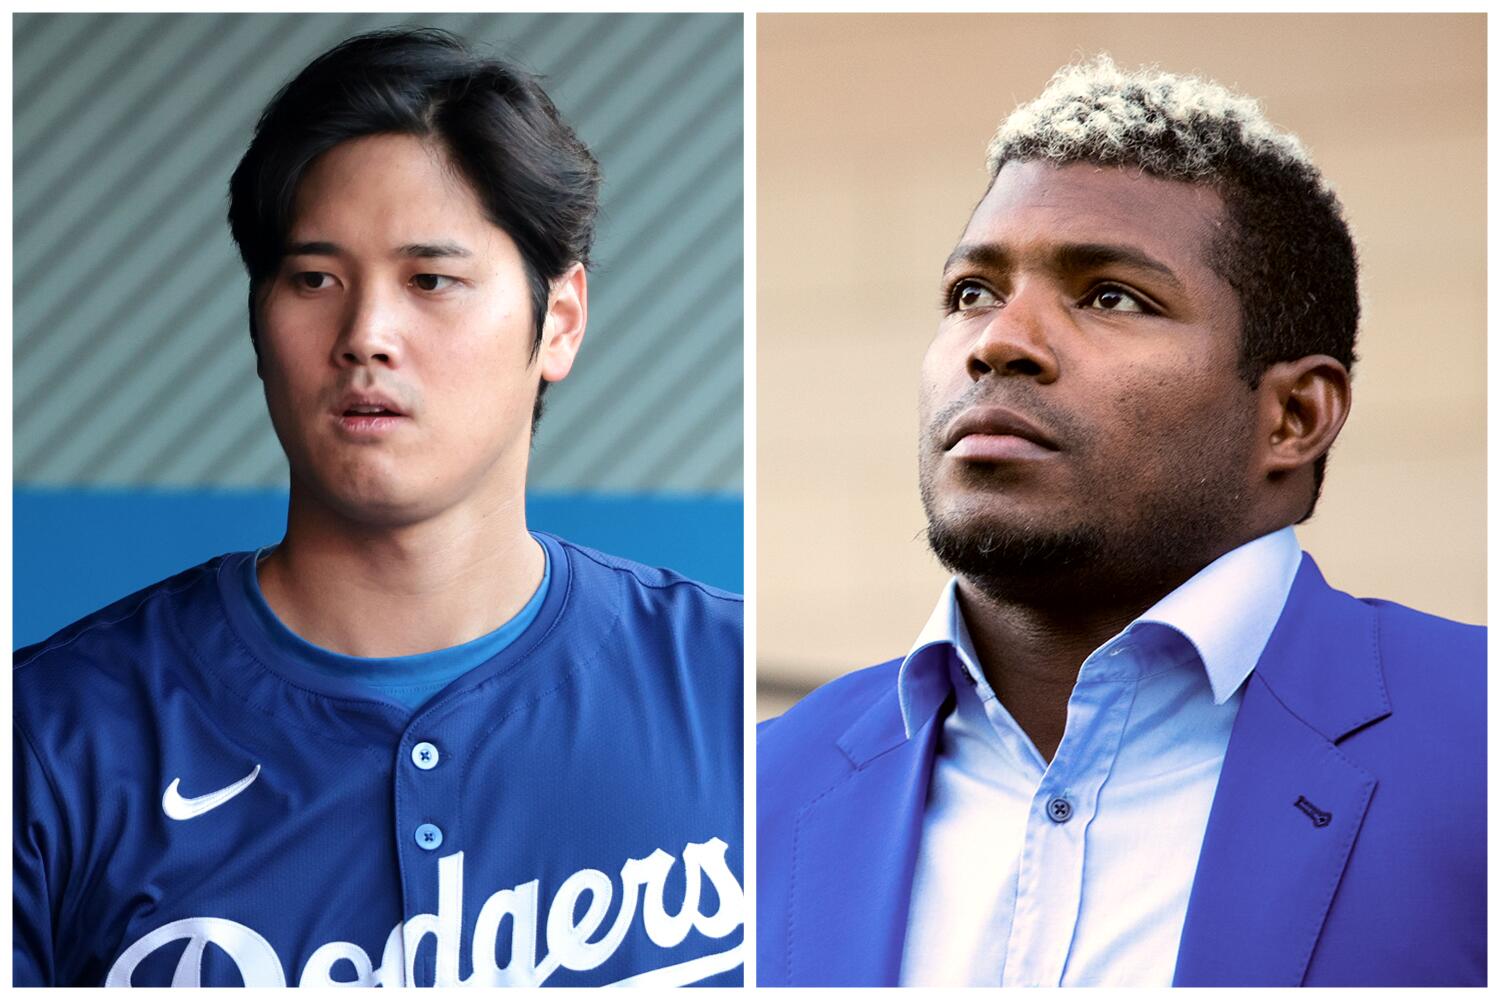 Ohtani says he's cooperating with investigators. Yasiel Puig offers a cautionary tale